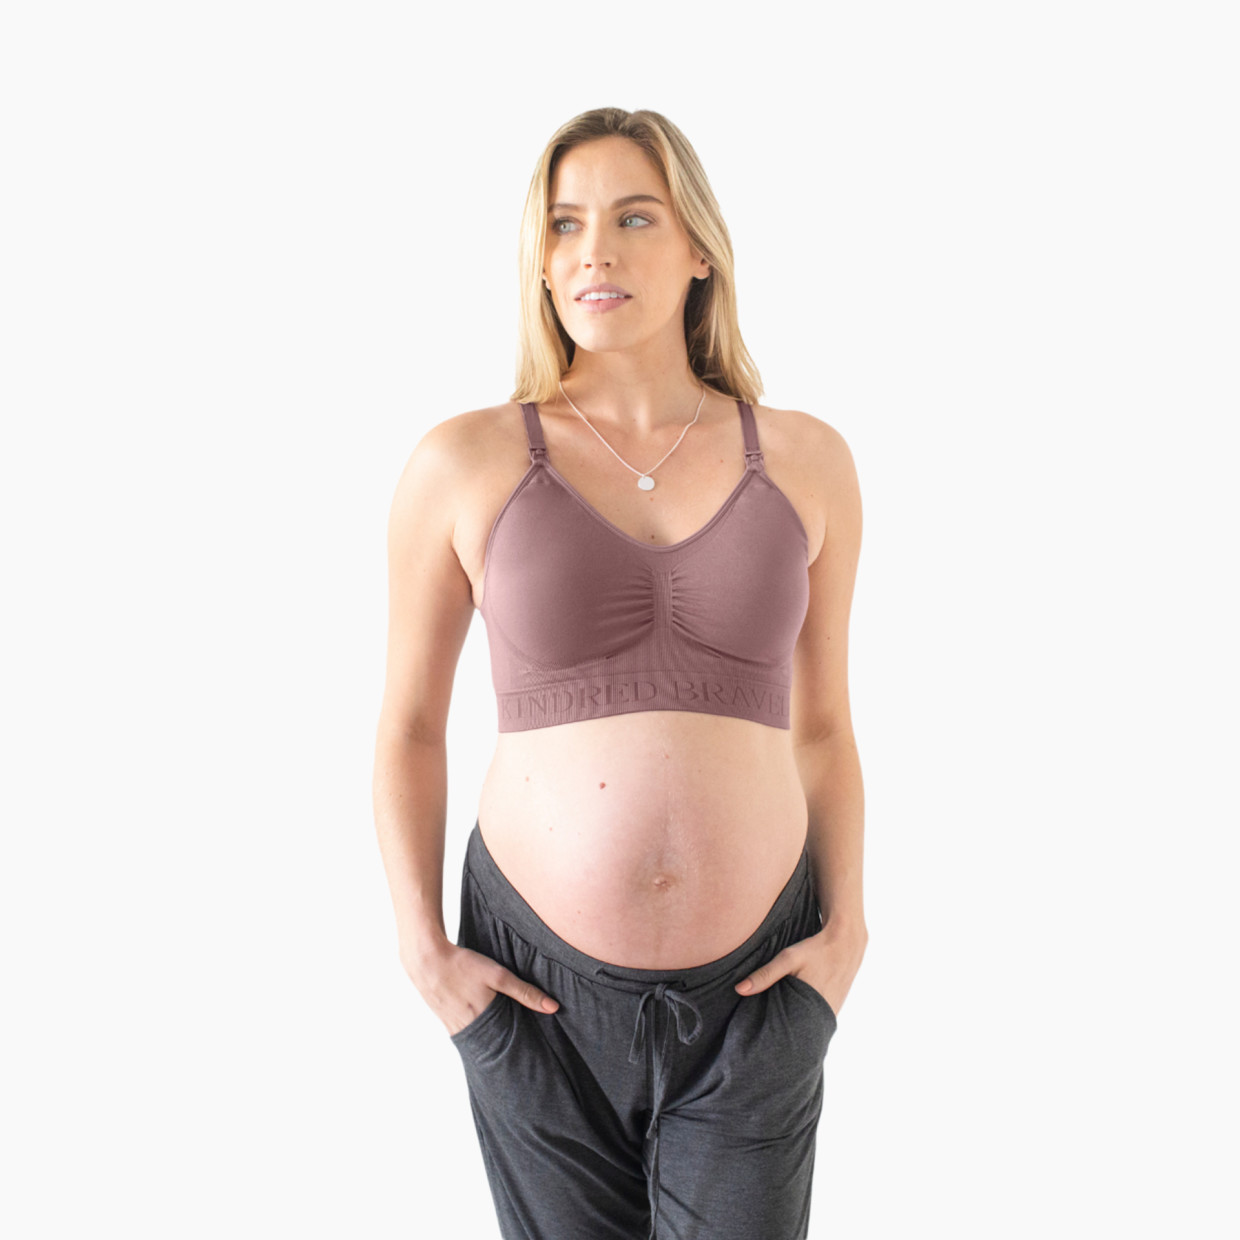 Buy Kindred Bravely Sublime Support Low Impact Nursing & Maternity